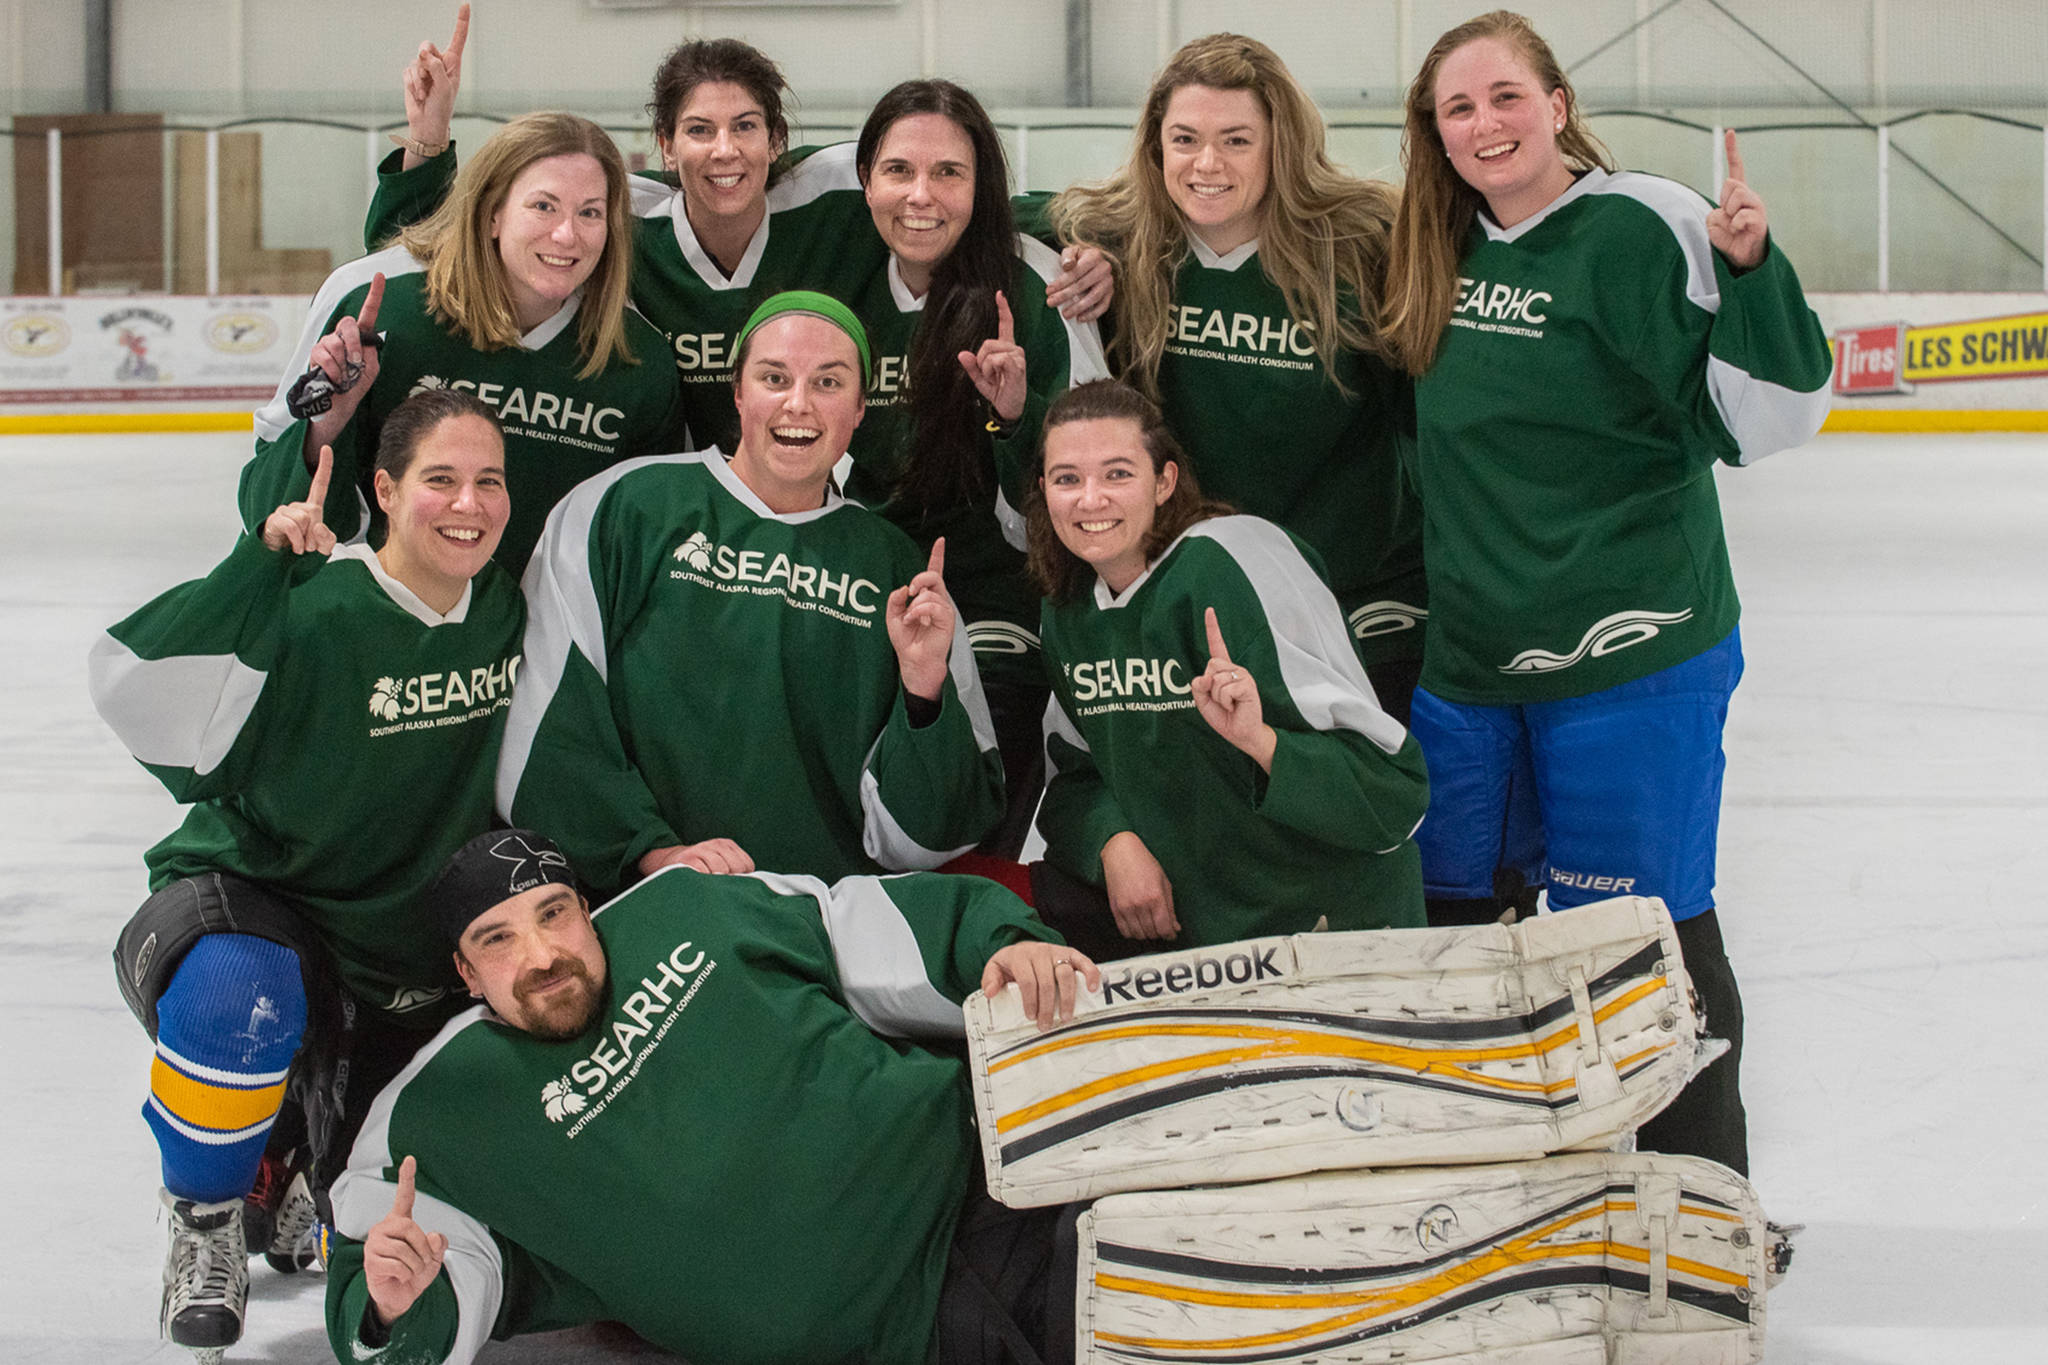 Eagle Beach women, four others squads crowned adult hockey champions